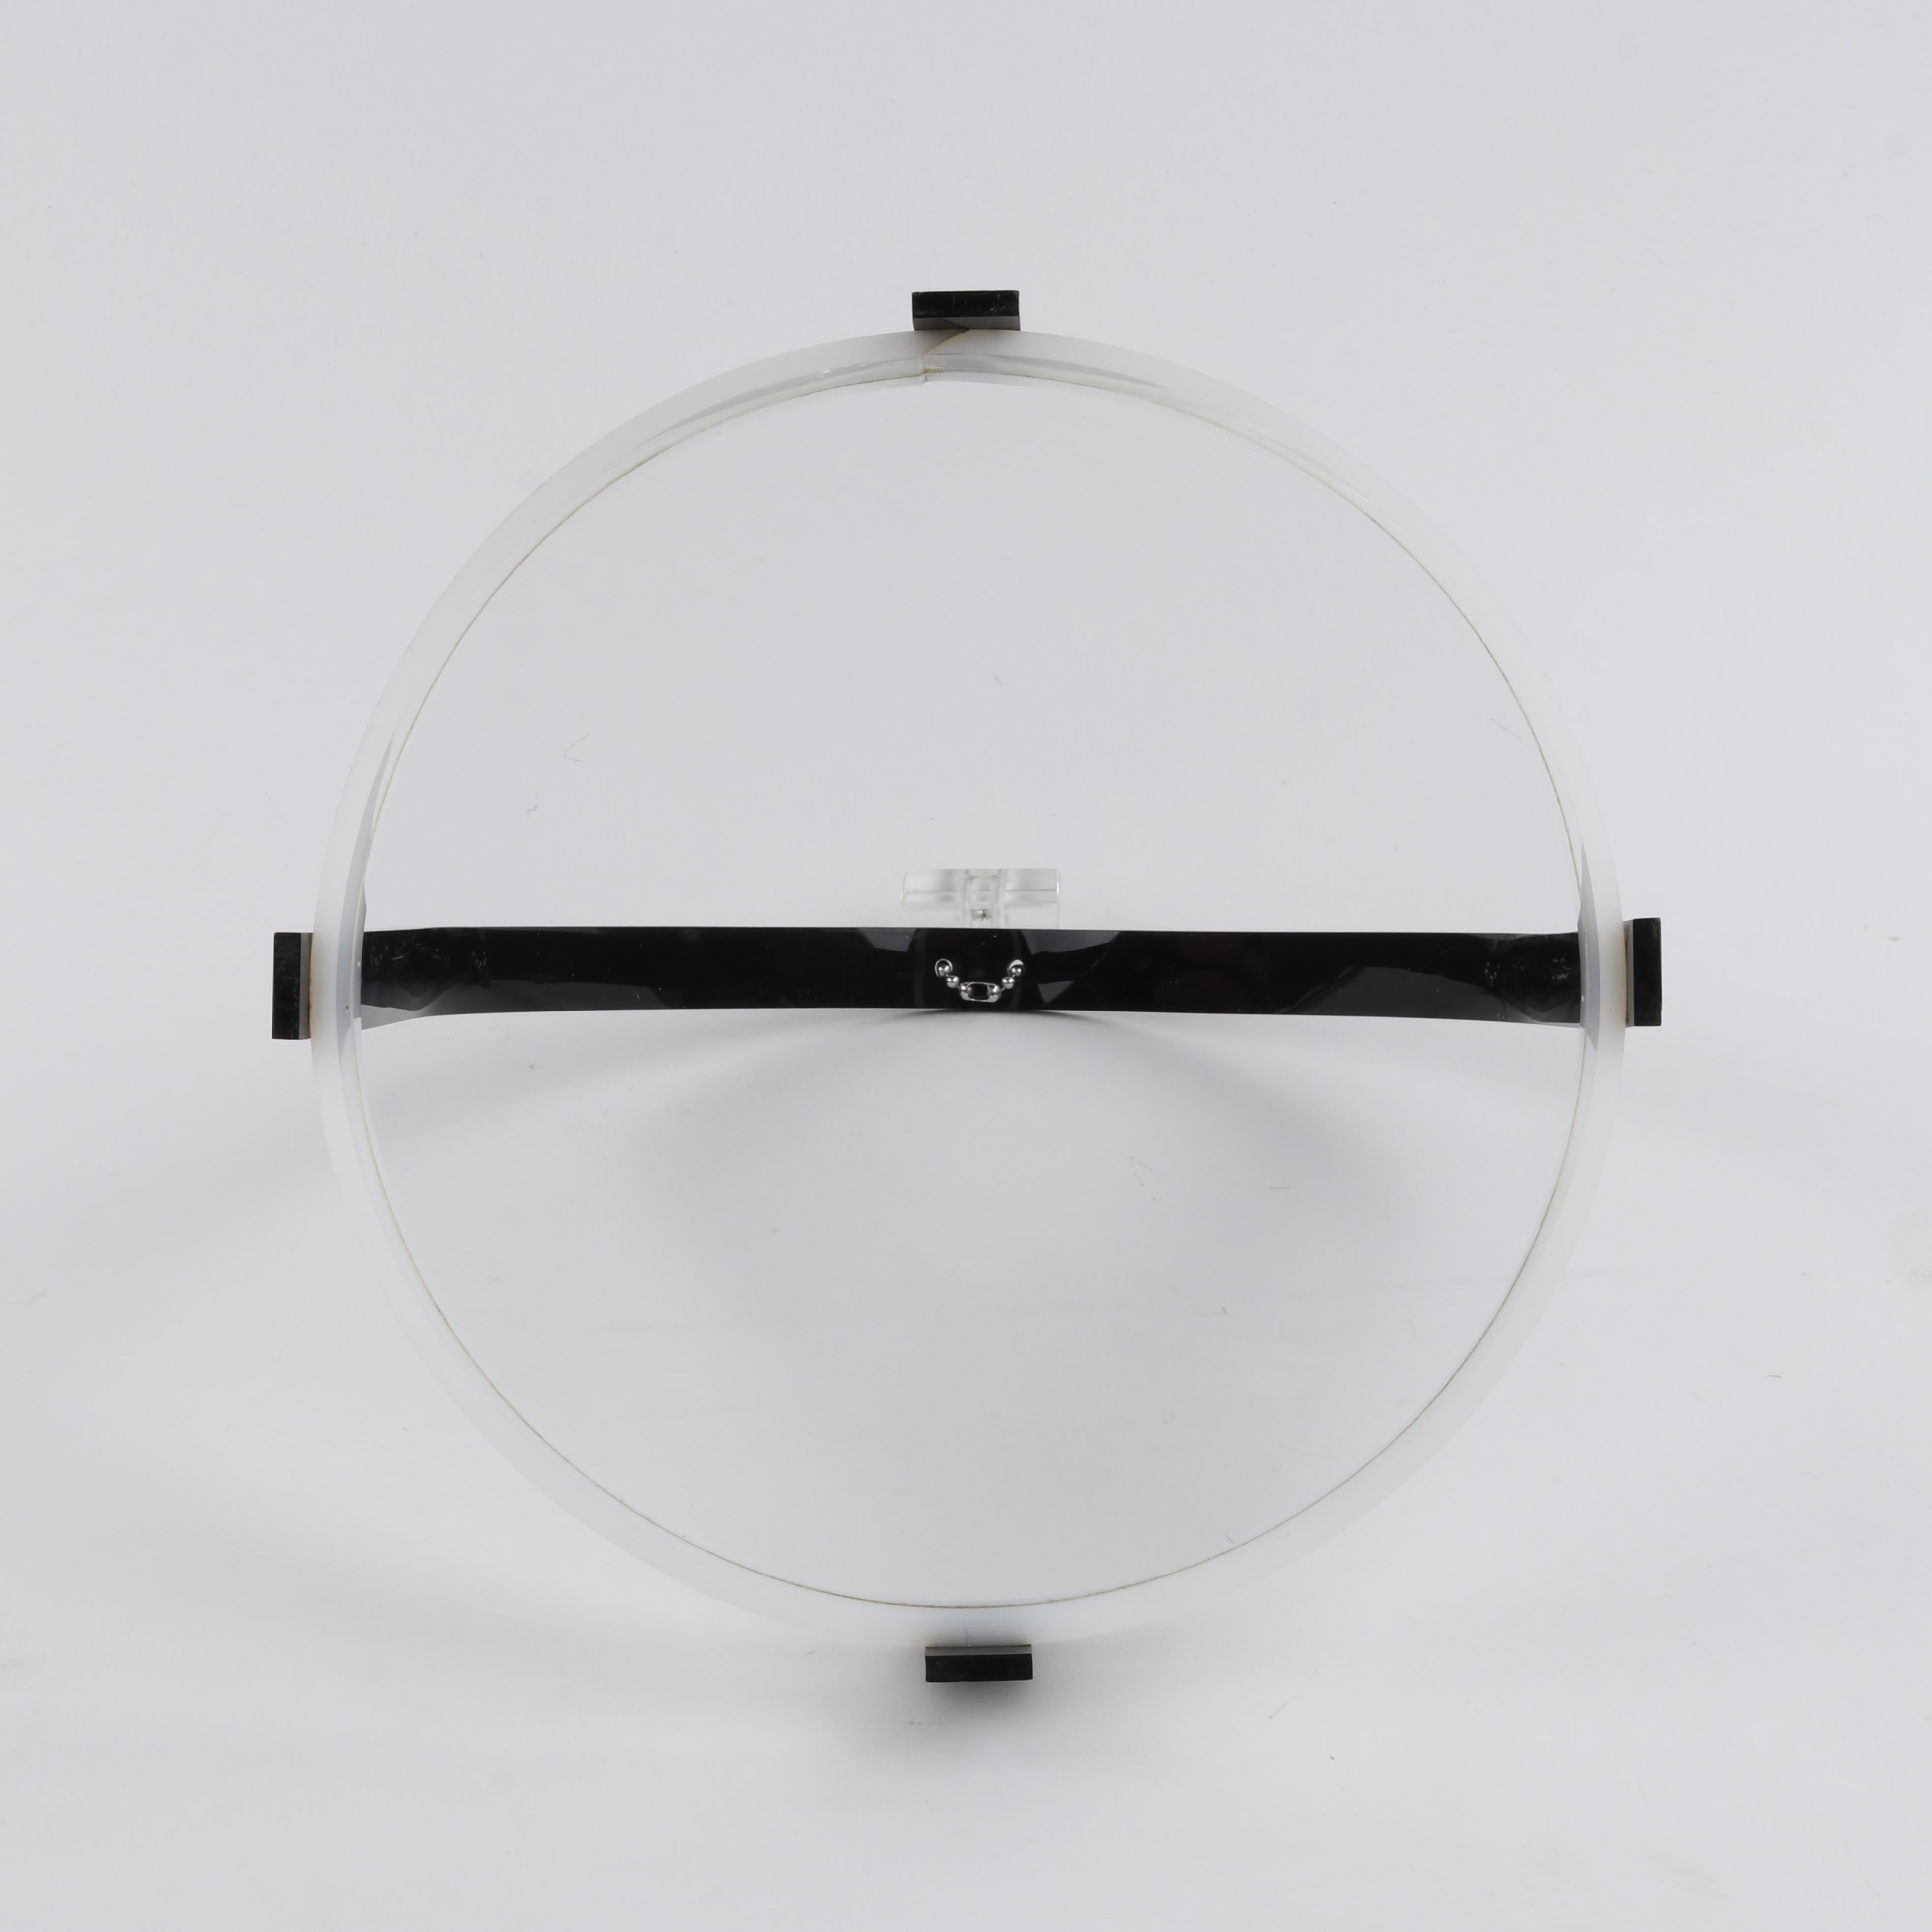 c.1930s-1940s Art Deco Lucite Circular Structured Handheld Serving Beverage Tray For Sale 6